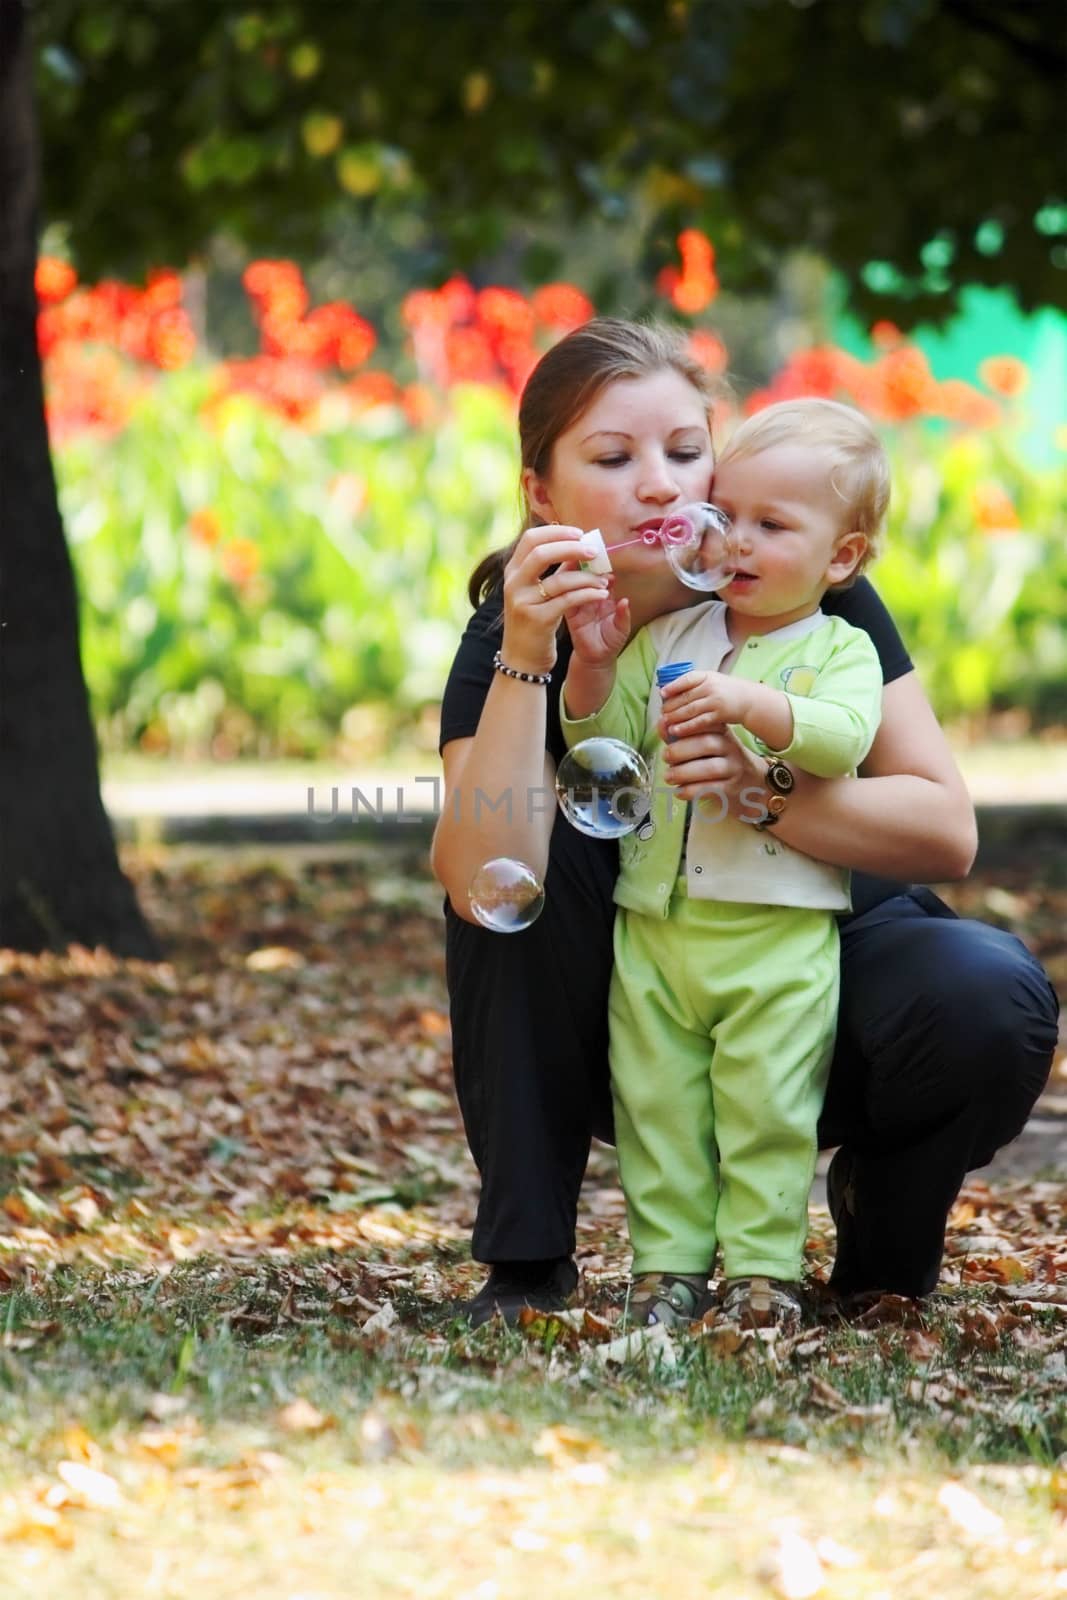 Young woman with her son blows bubbles in a city park